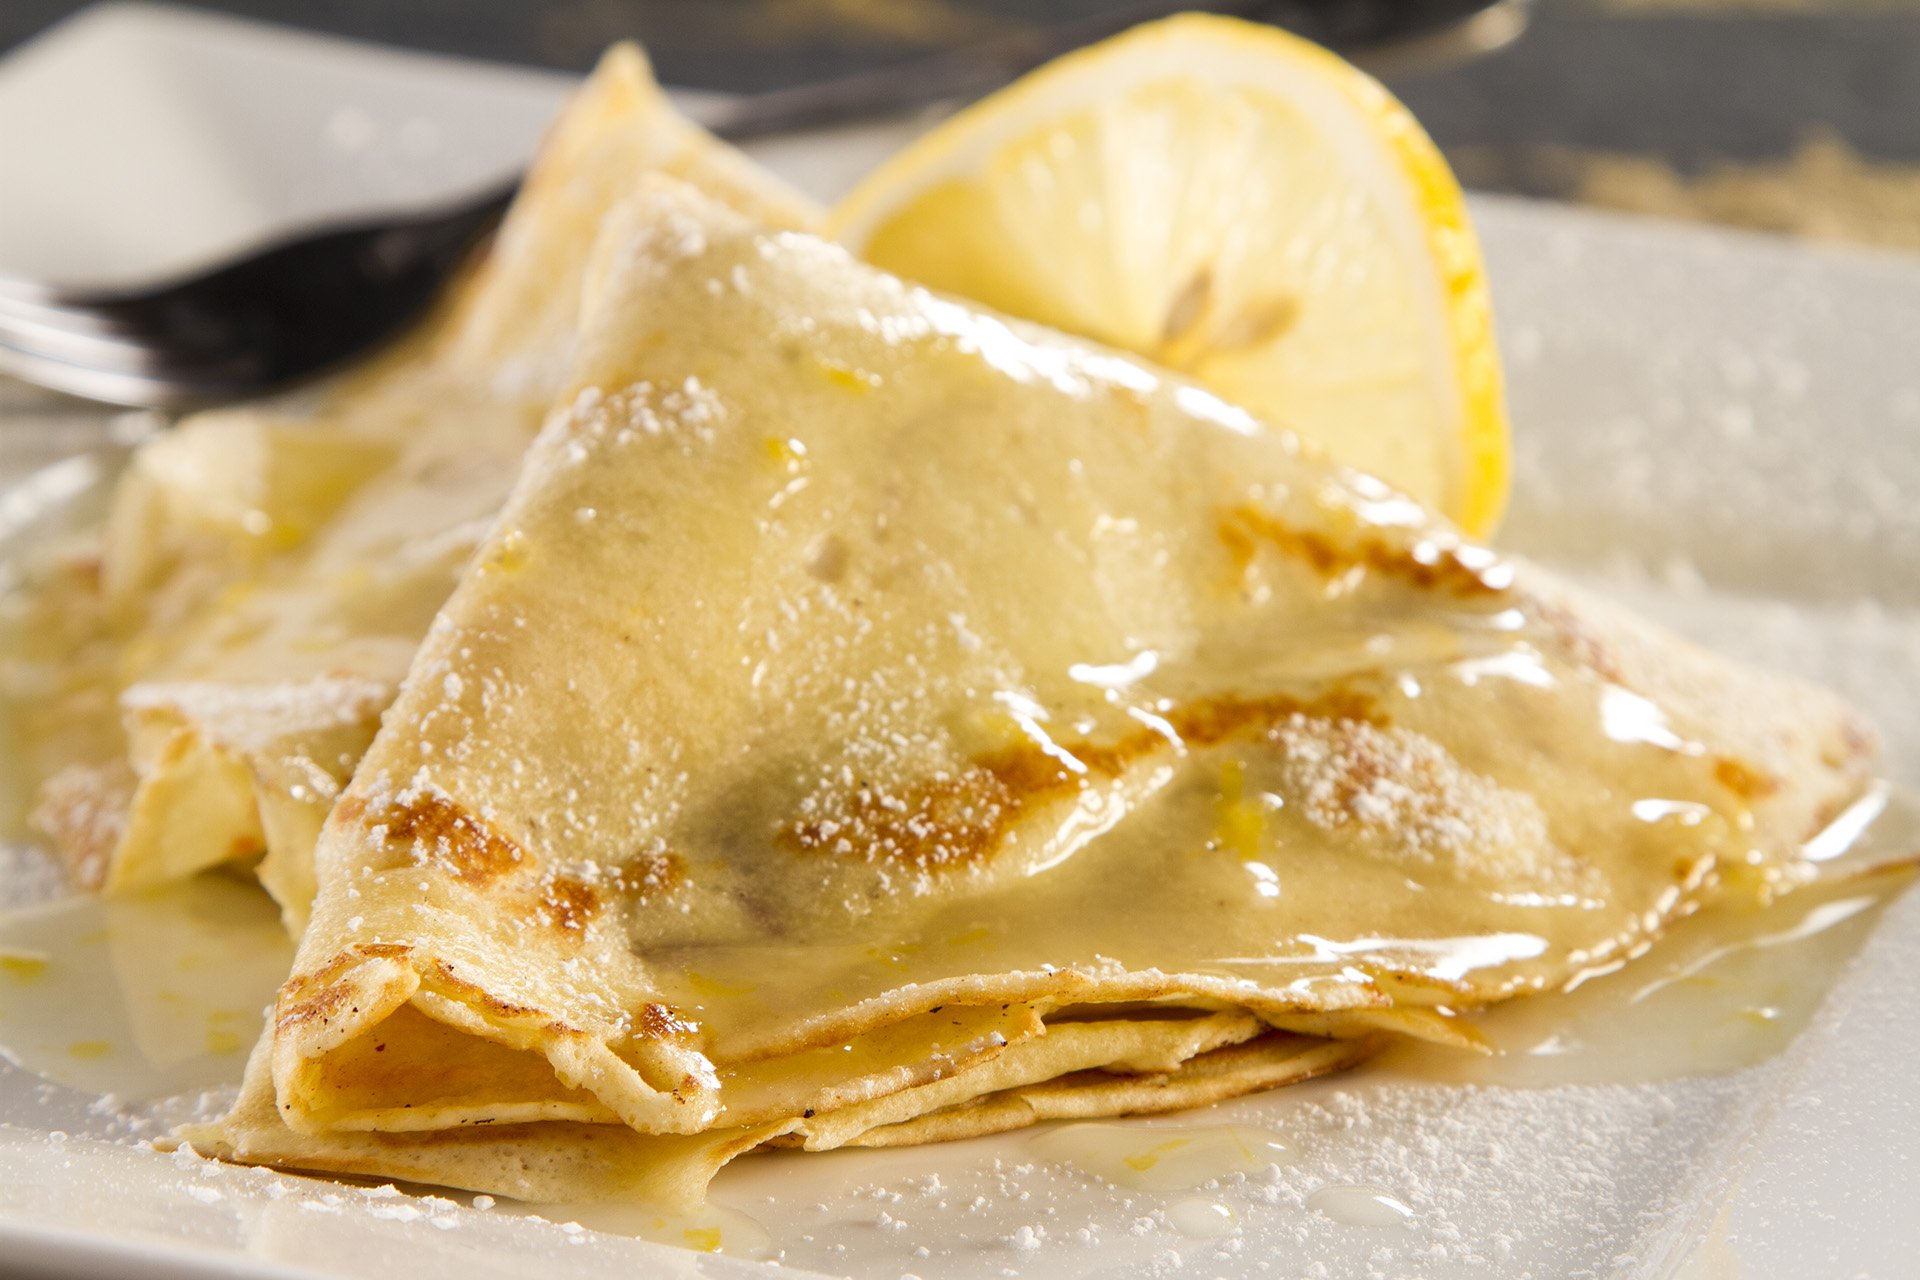 This is a homemade Lemon Sauce prepared with fresh lemon, grated lemon peel, butter, sugar and more. The Raspberry Crepe is an added bonus, but this Lemon Sauce would be great on any dessert.